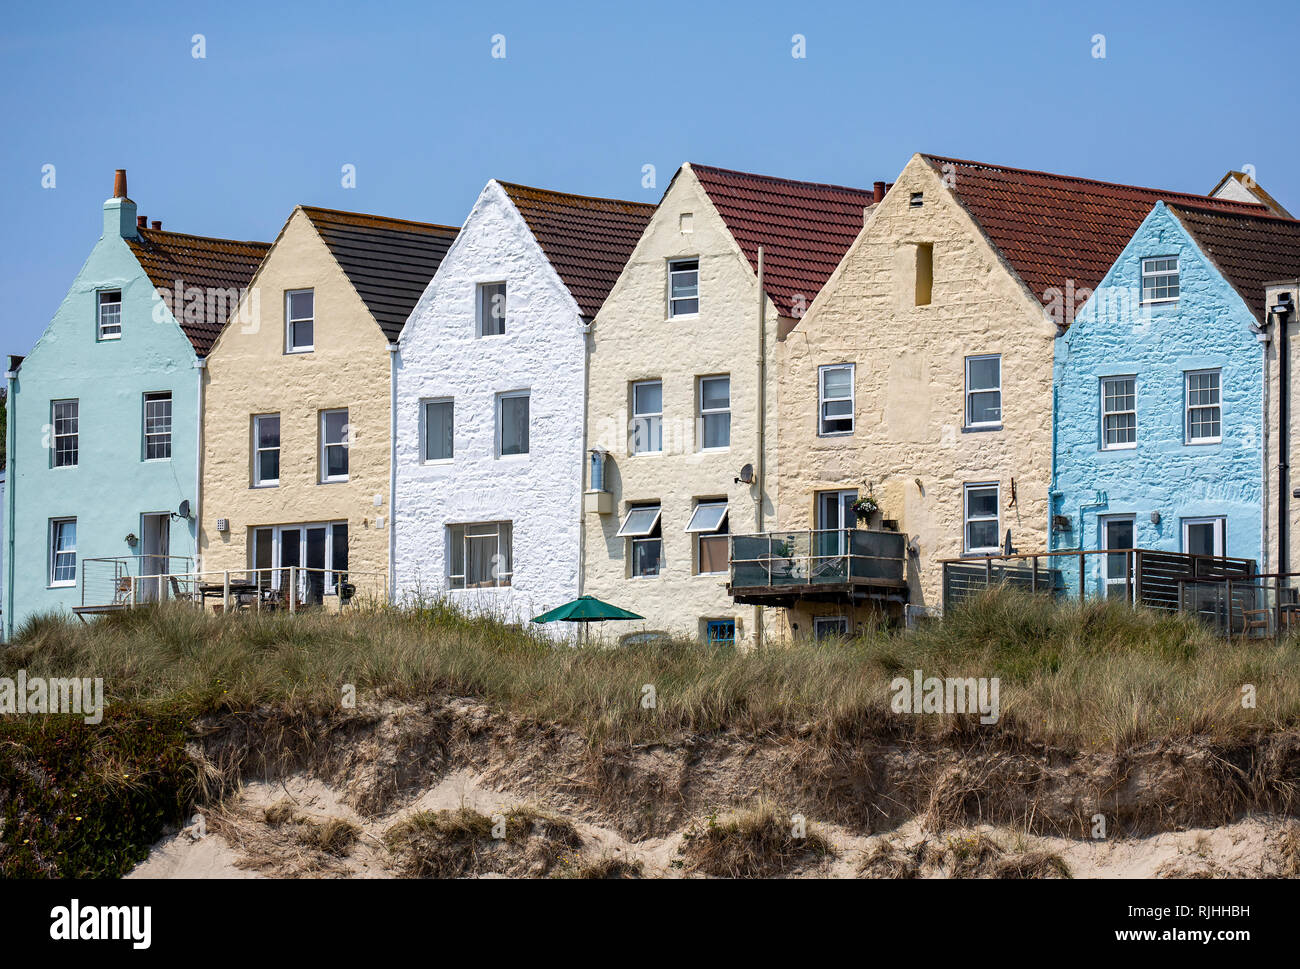 The English Row of colourful terraced houses near Braye Harbour on Alderney, providing both resteraunts and accommodation. Stock Photo